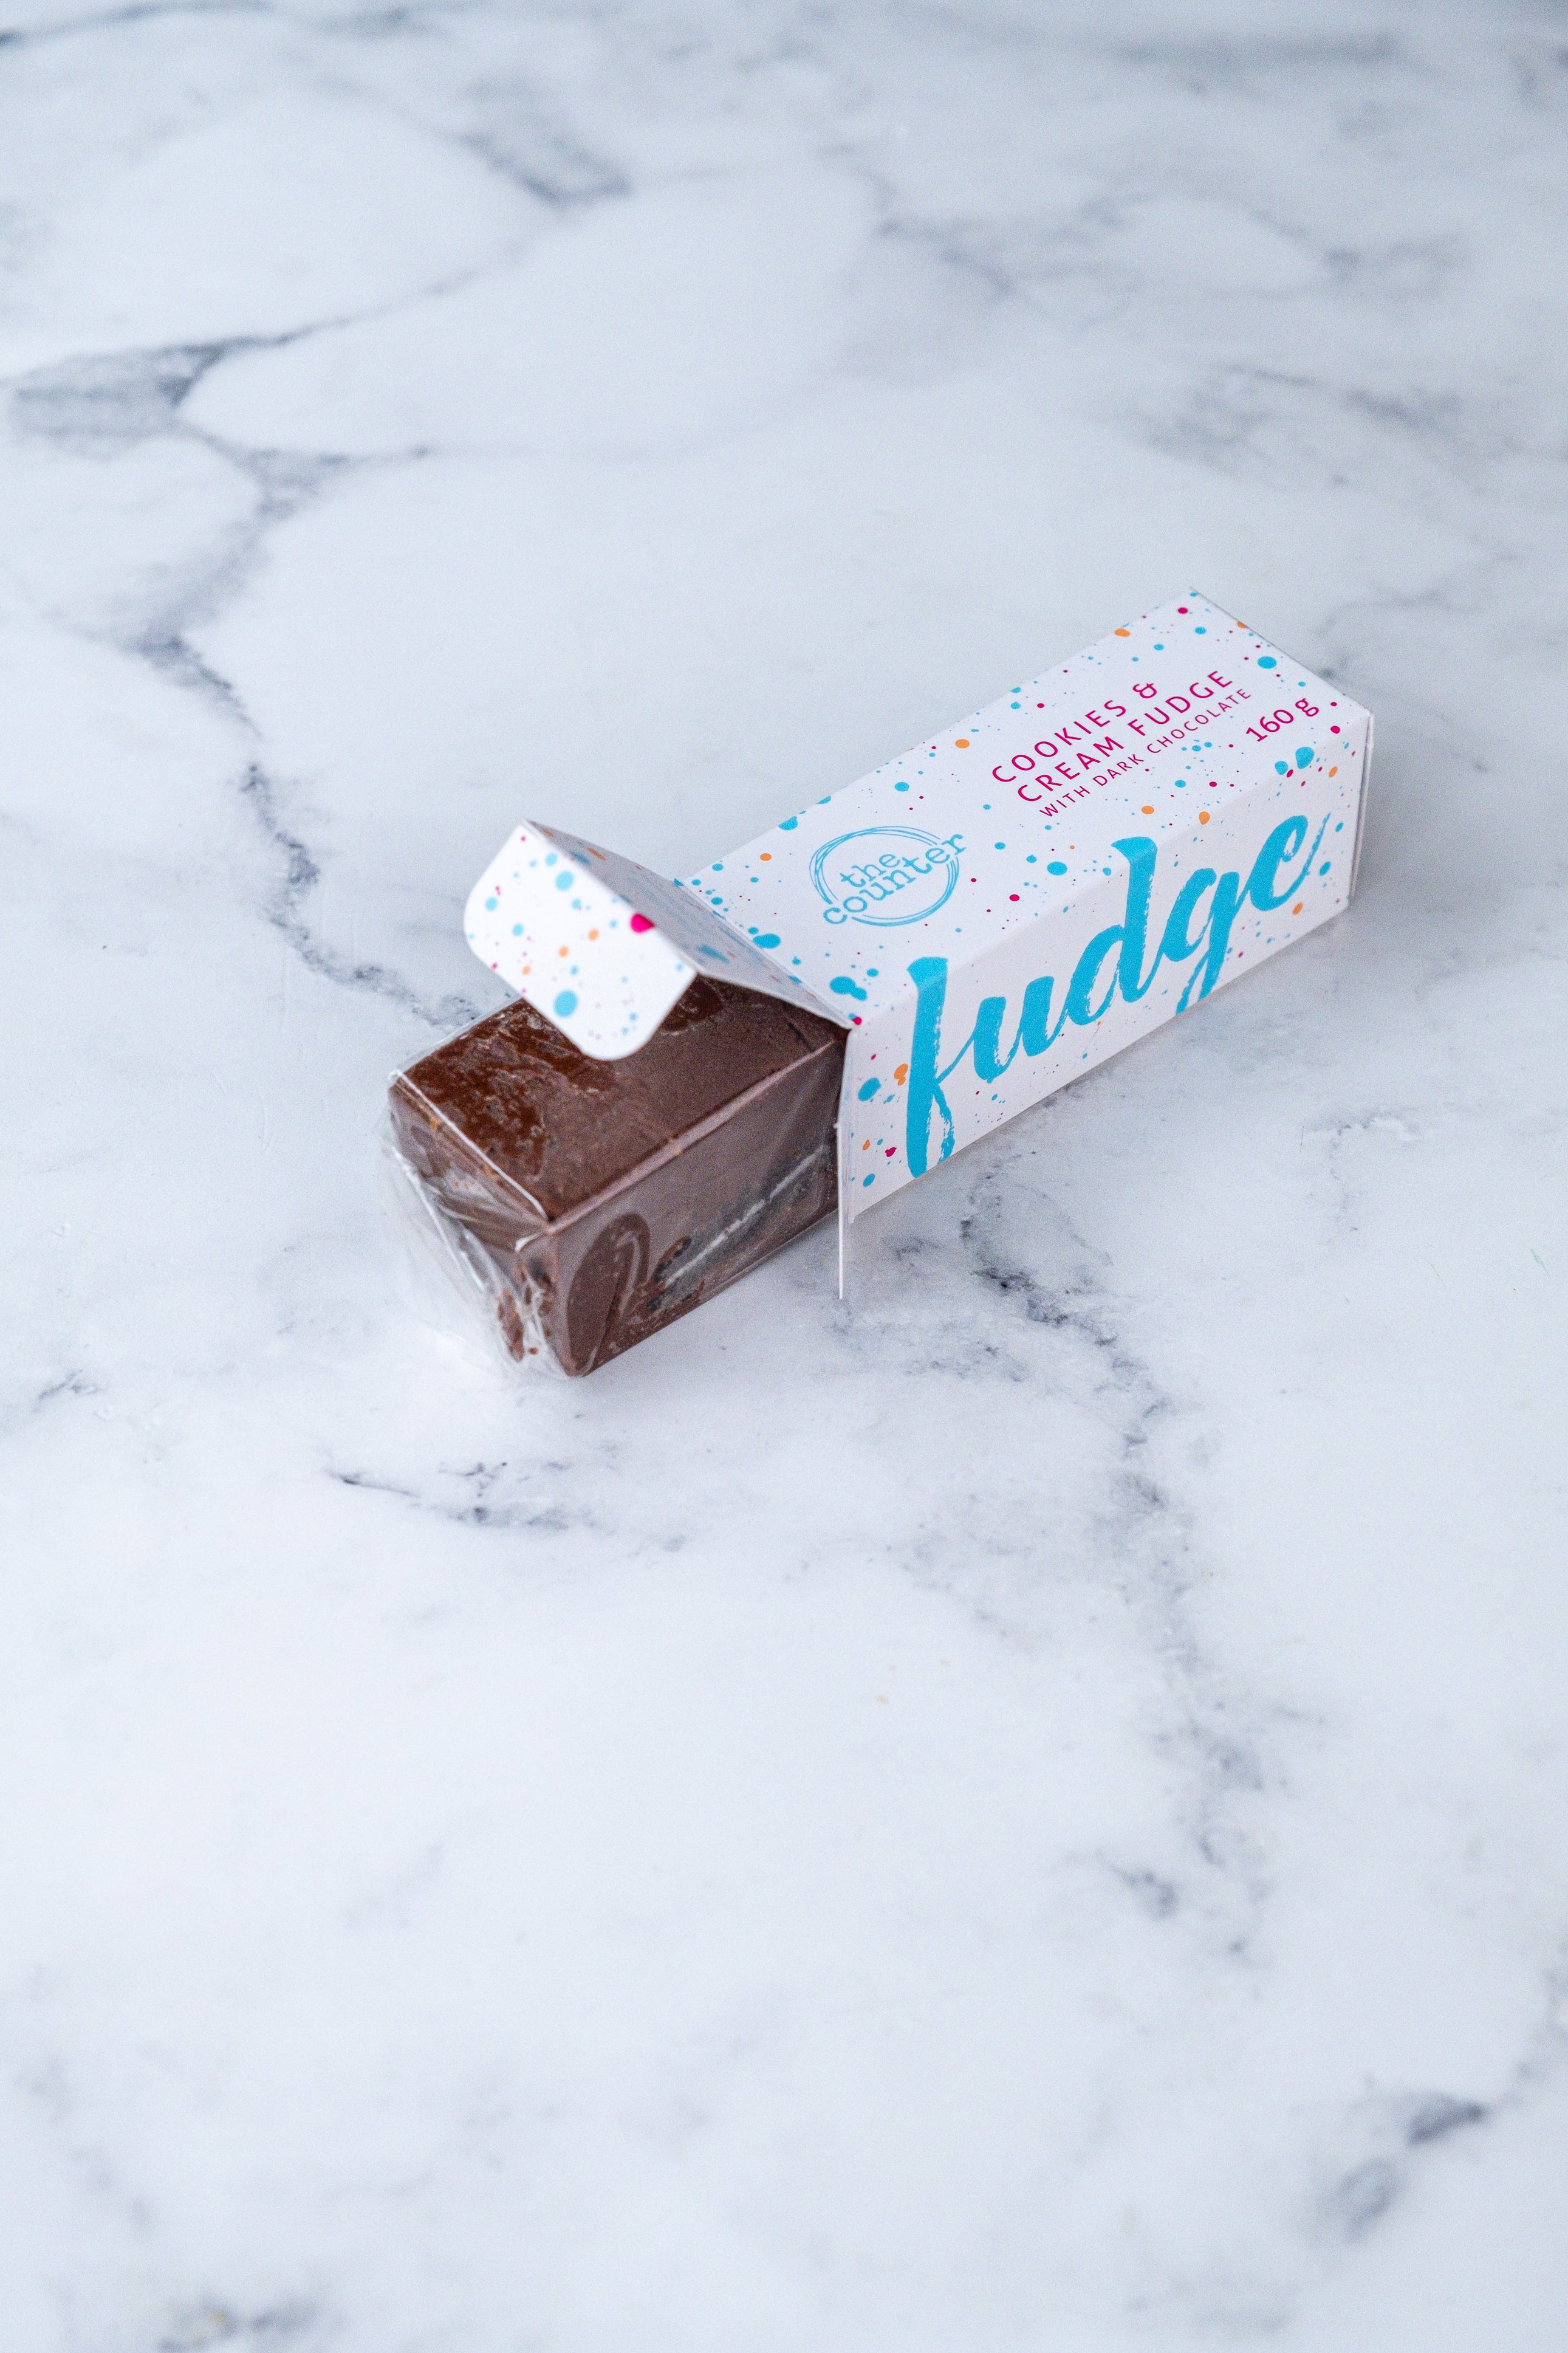 A large bar of dark chocolate and Oreo fudge (cookies and cream) peeks our from a white box. Paint splashes in bright blue and pink surround a messy circled logo for The Counter and the words 'Cookies & Cream fudge with dark chocolate' are written in cerise pink block lettering.